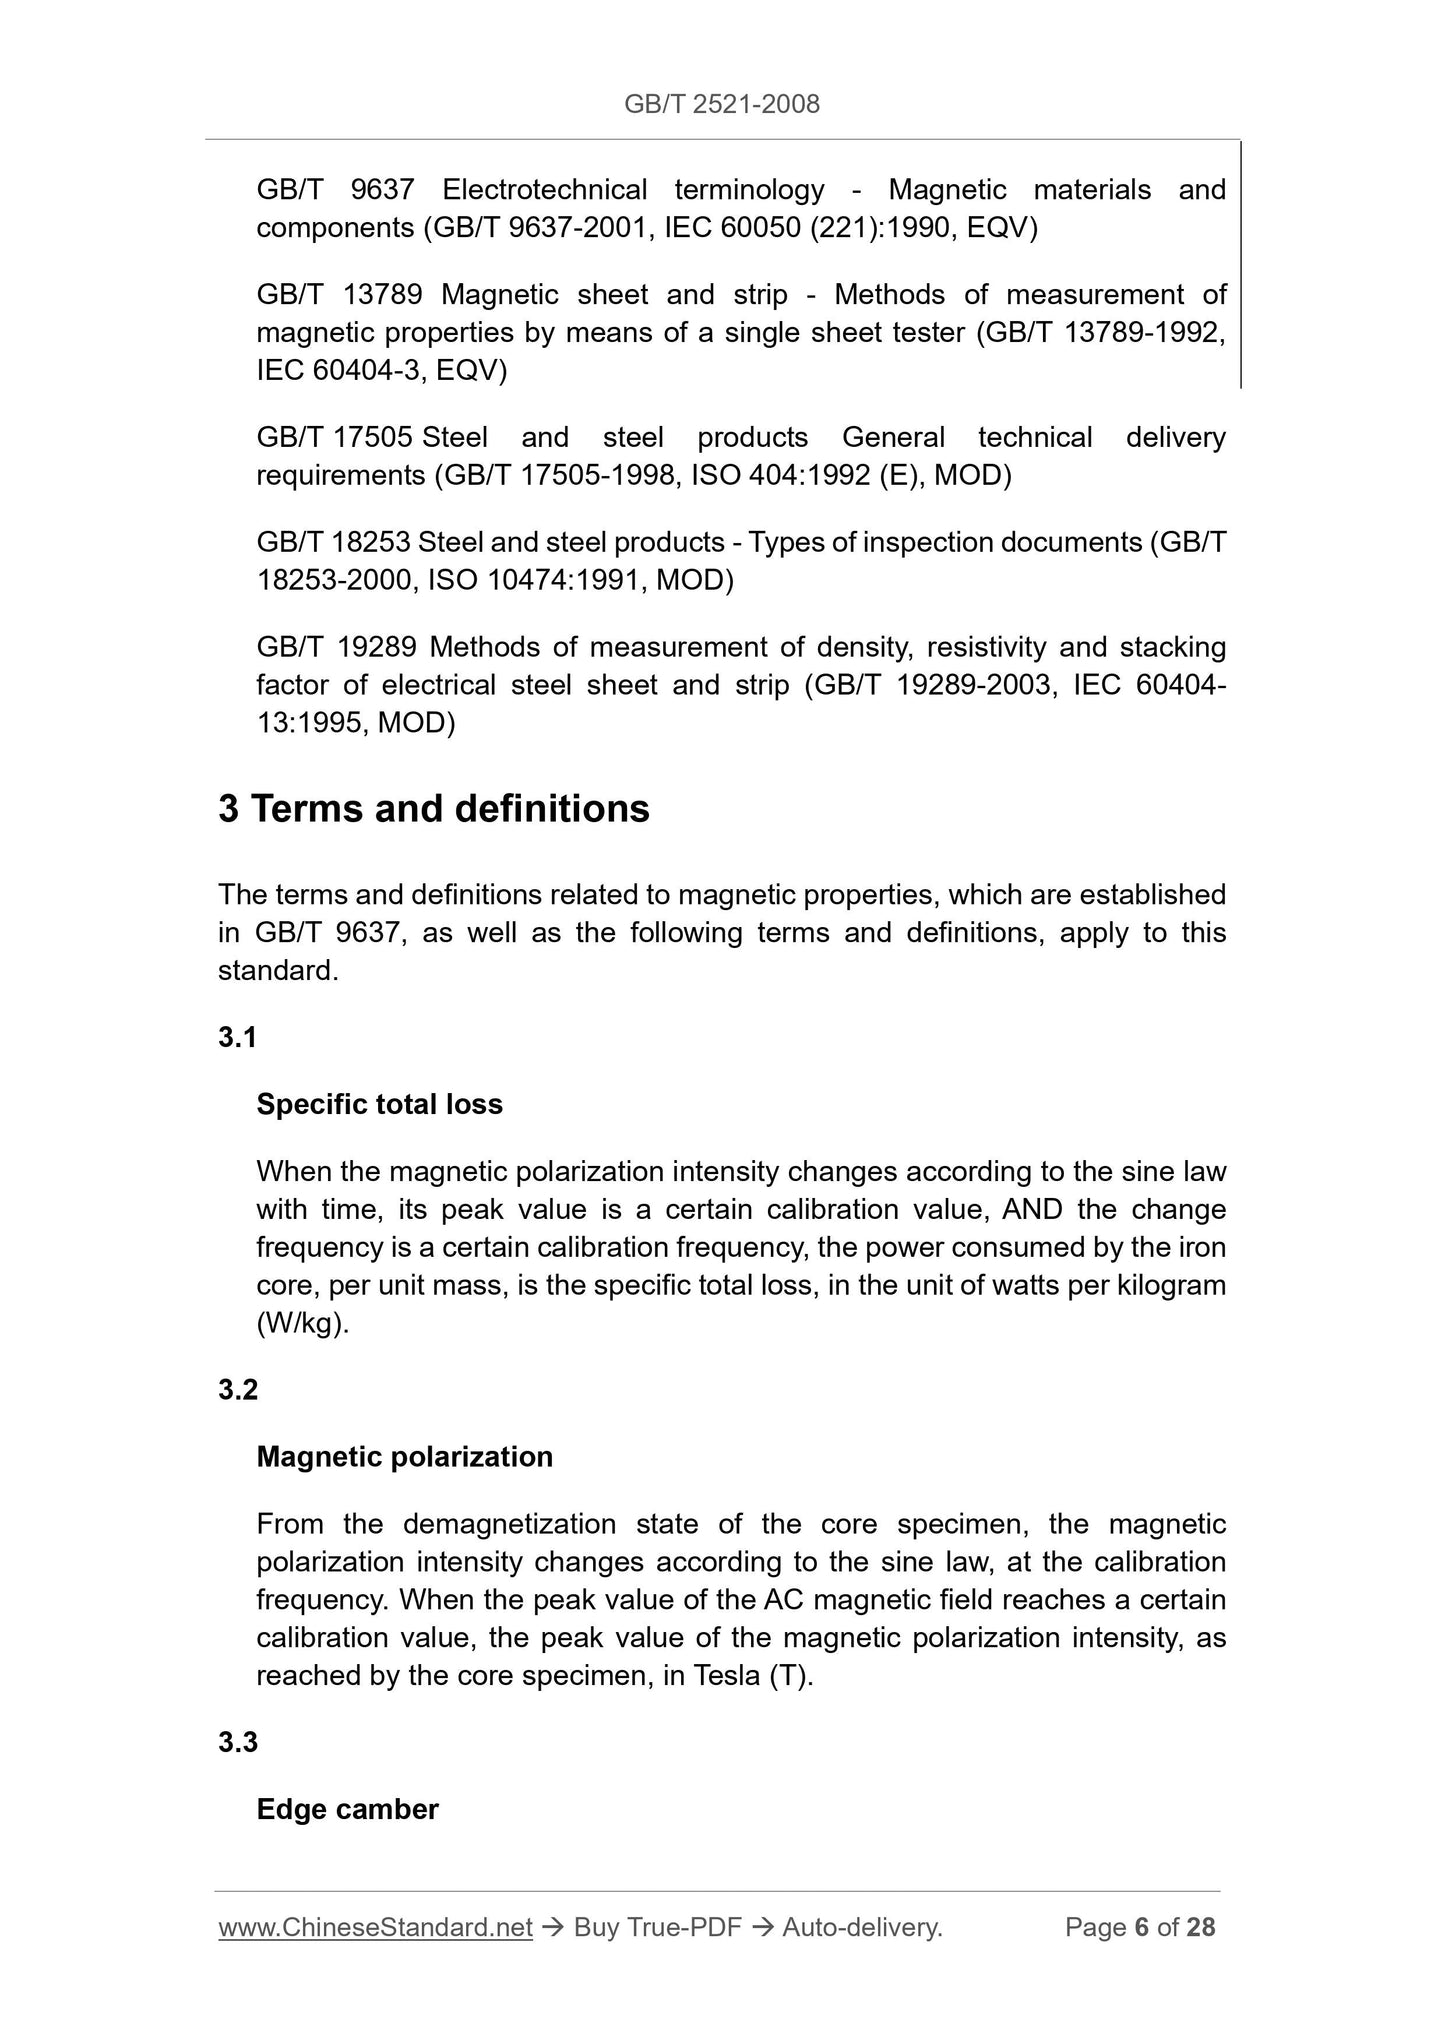 GB/T 2521-2008 Page 4